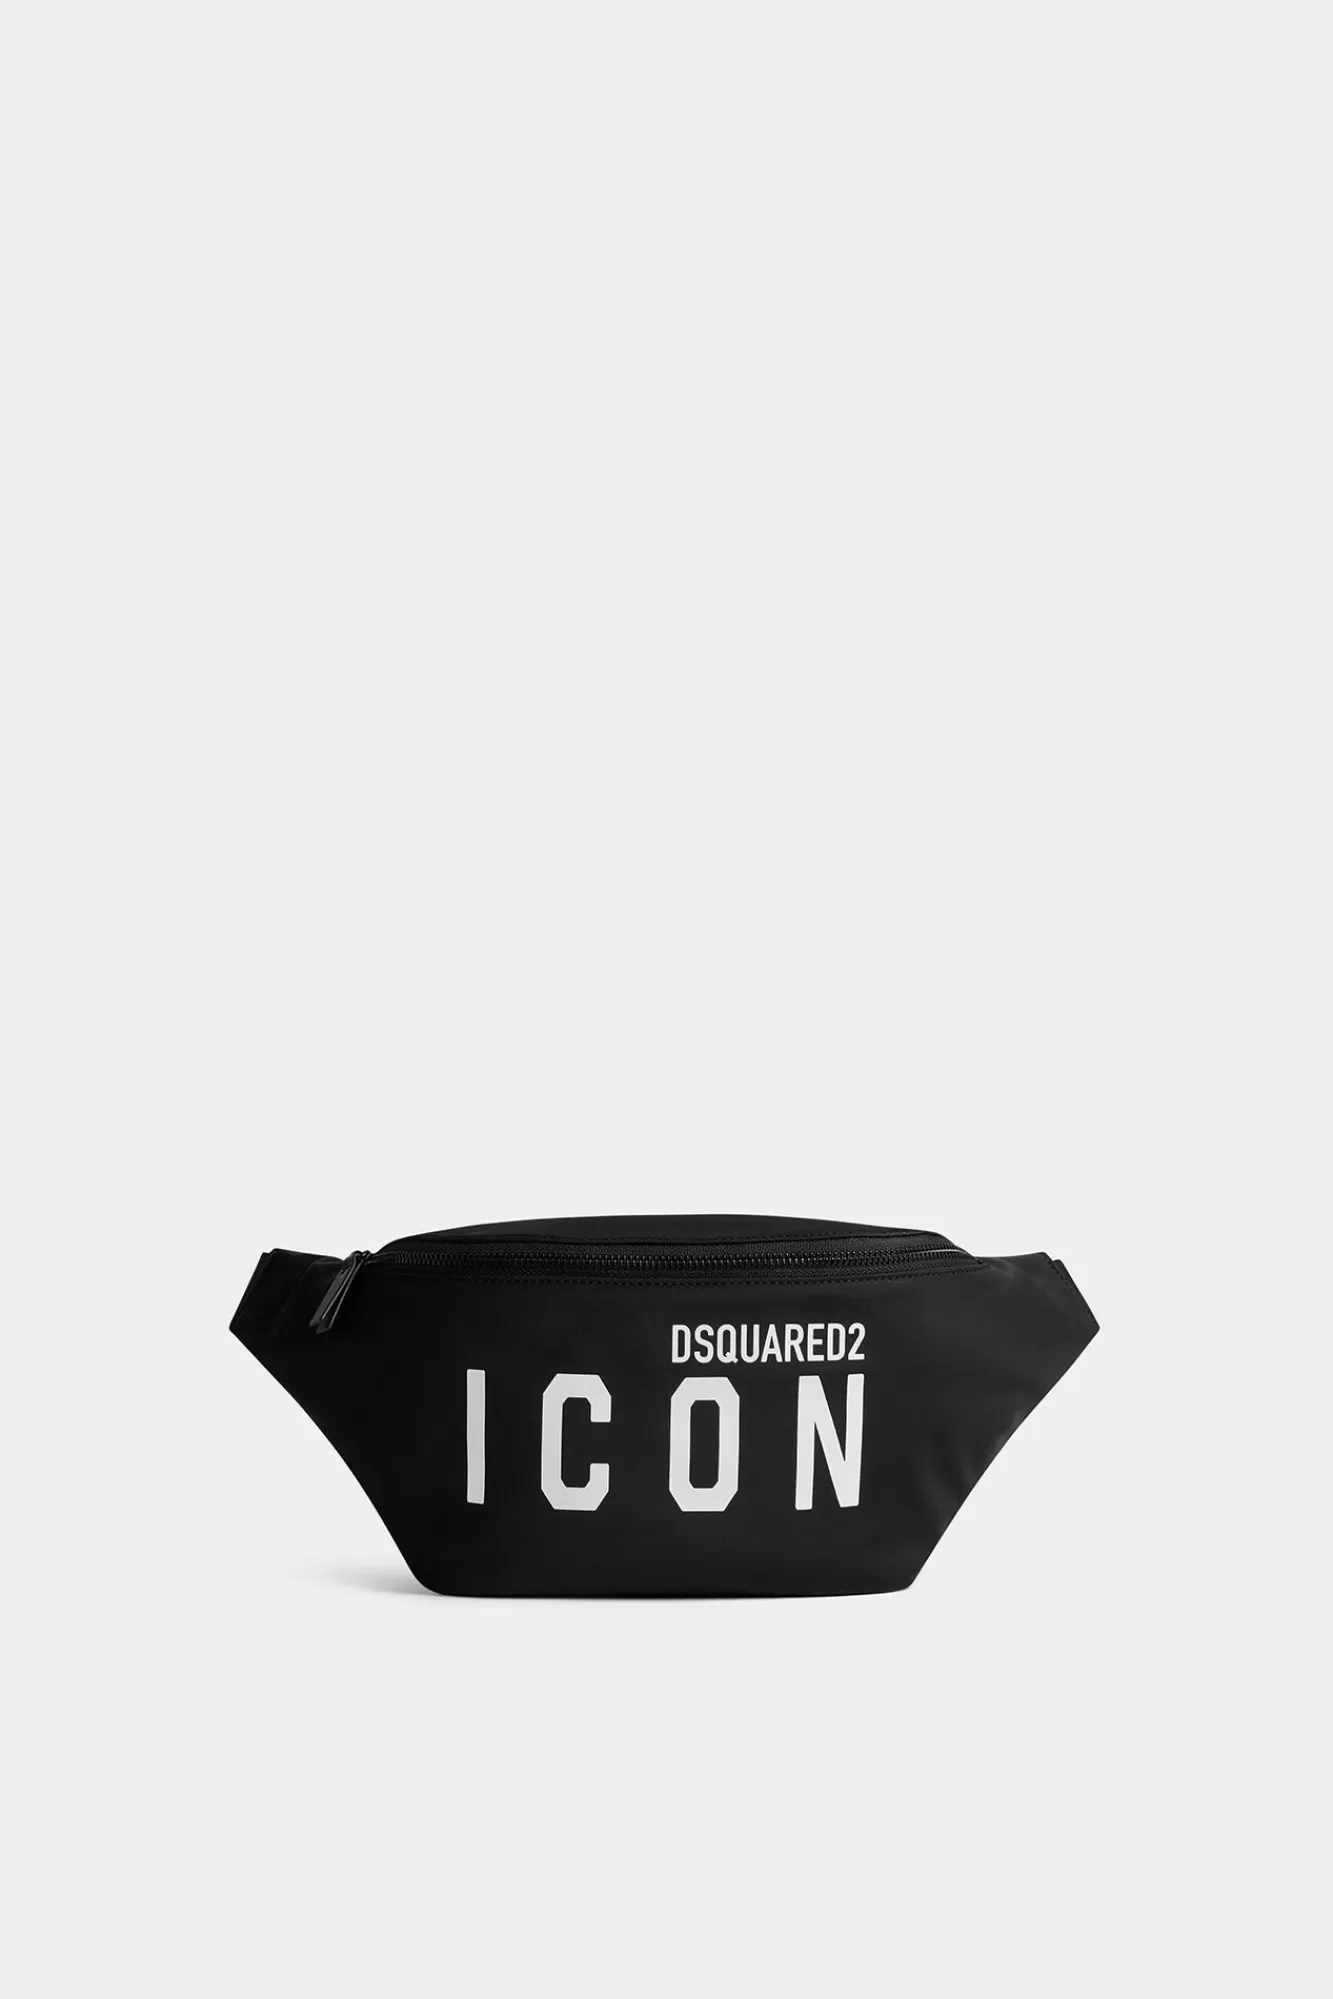 Icon Belt Bag<Dsquared2 Store